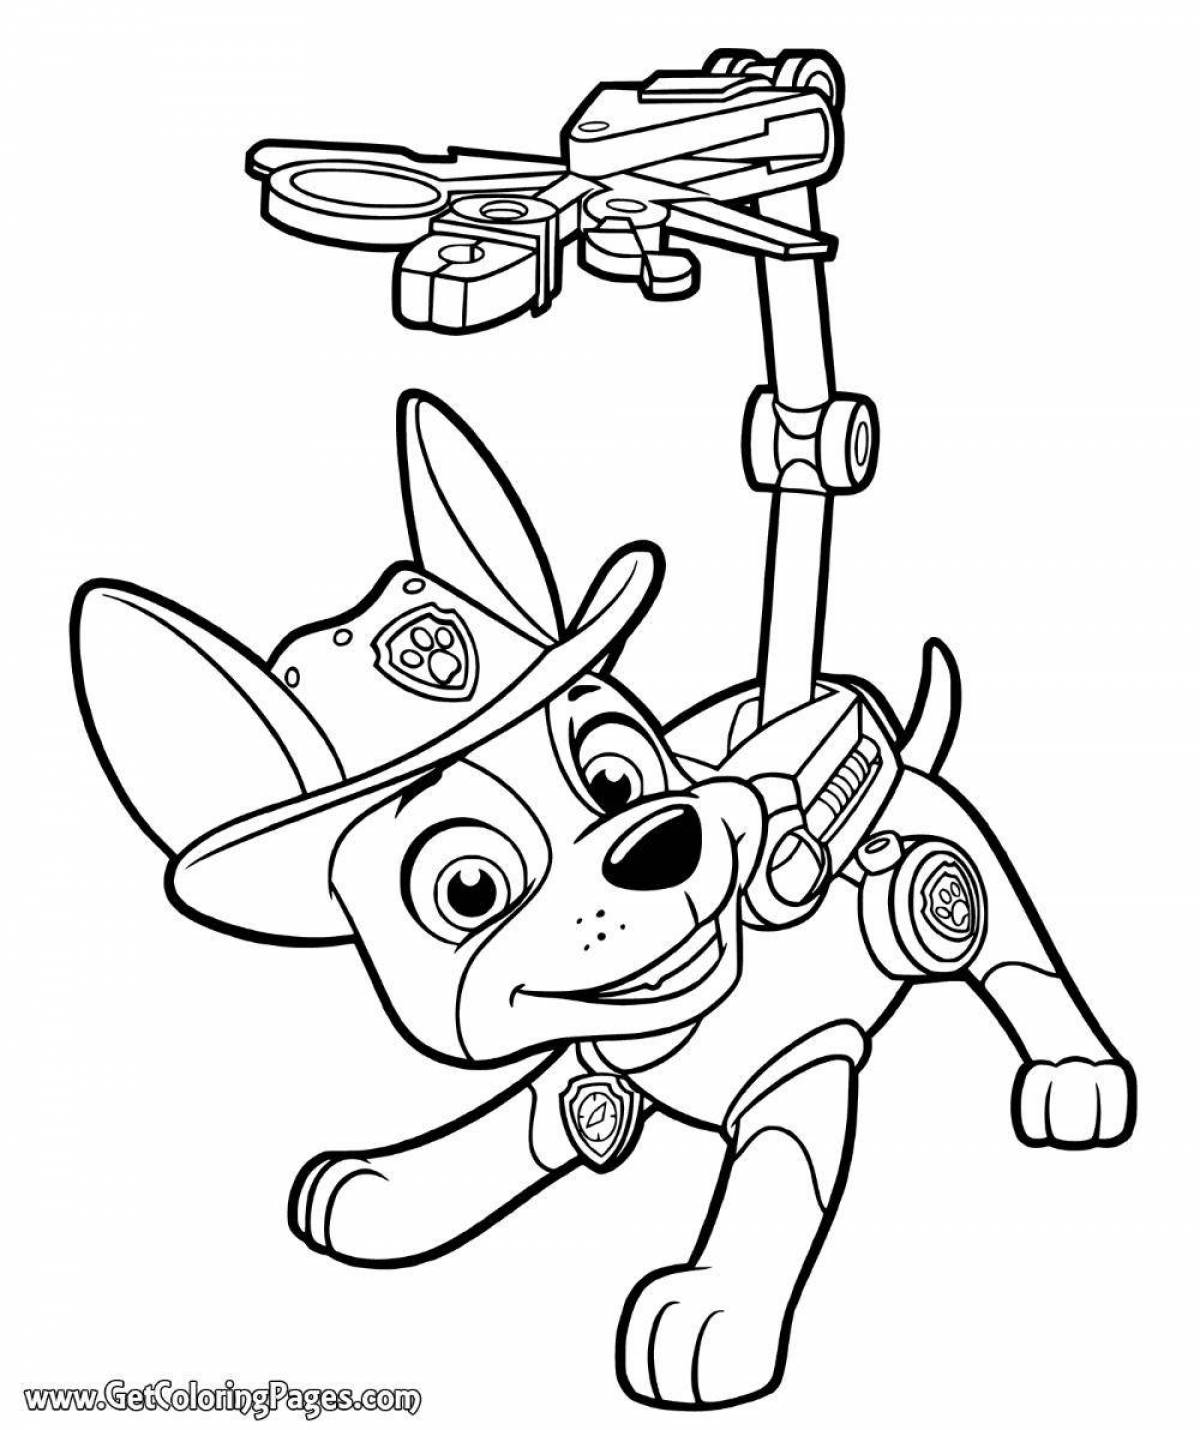 Coloring page incredible racer for kids